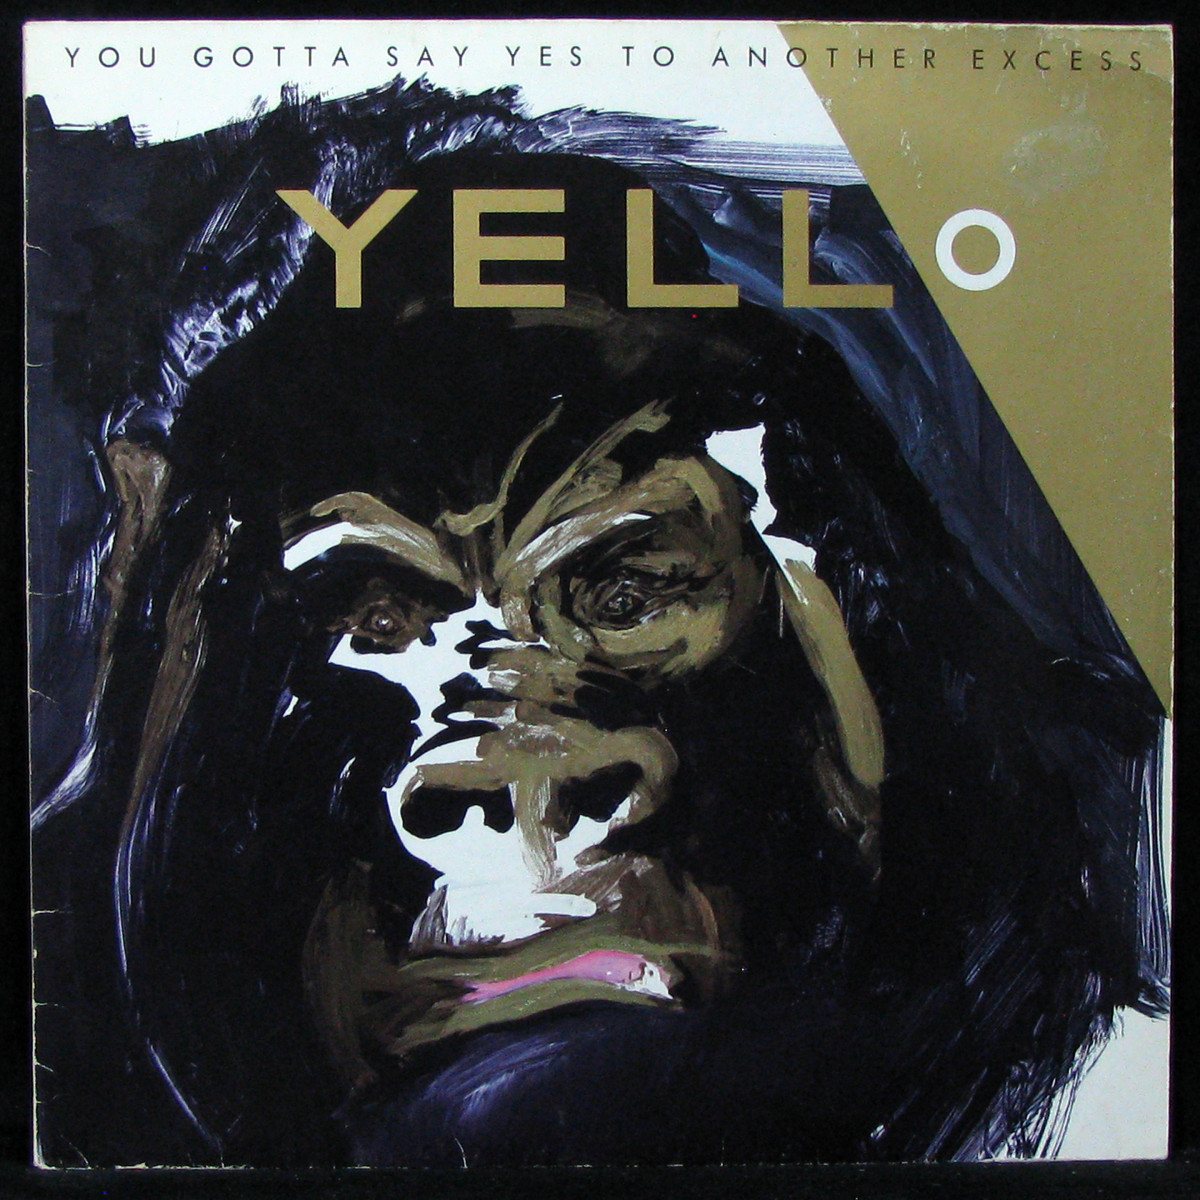 LP Yello — You Gotta Say Yes To Another Excess фото